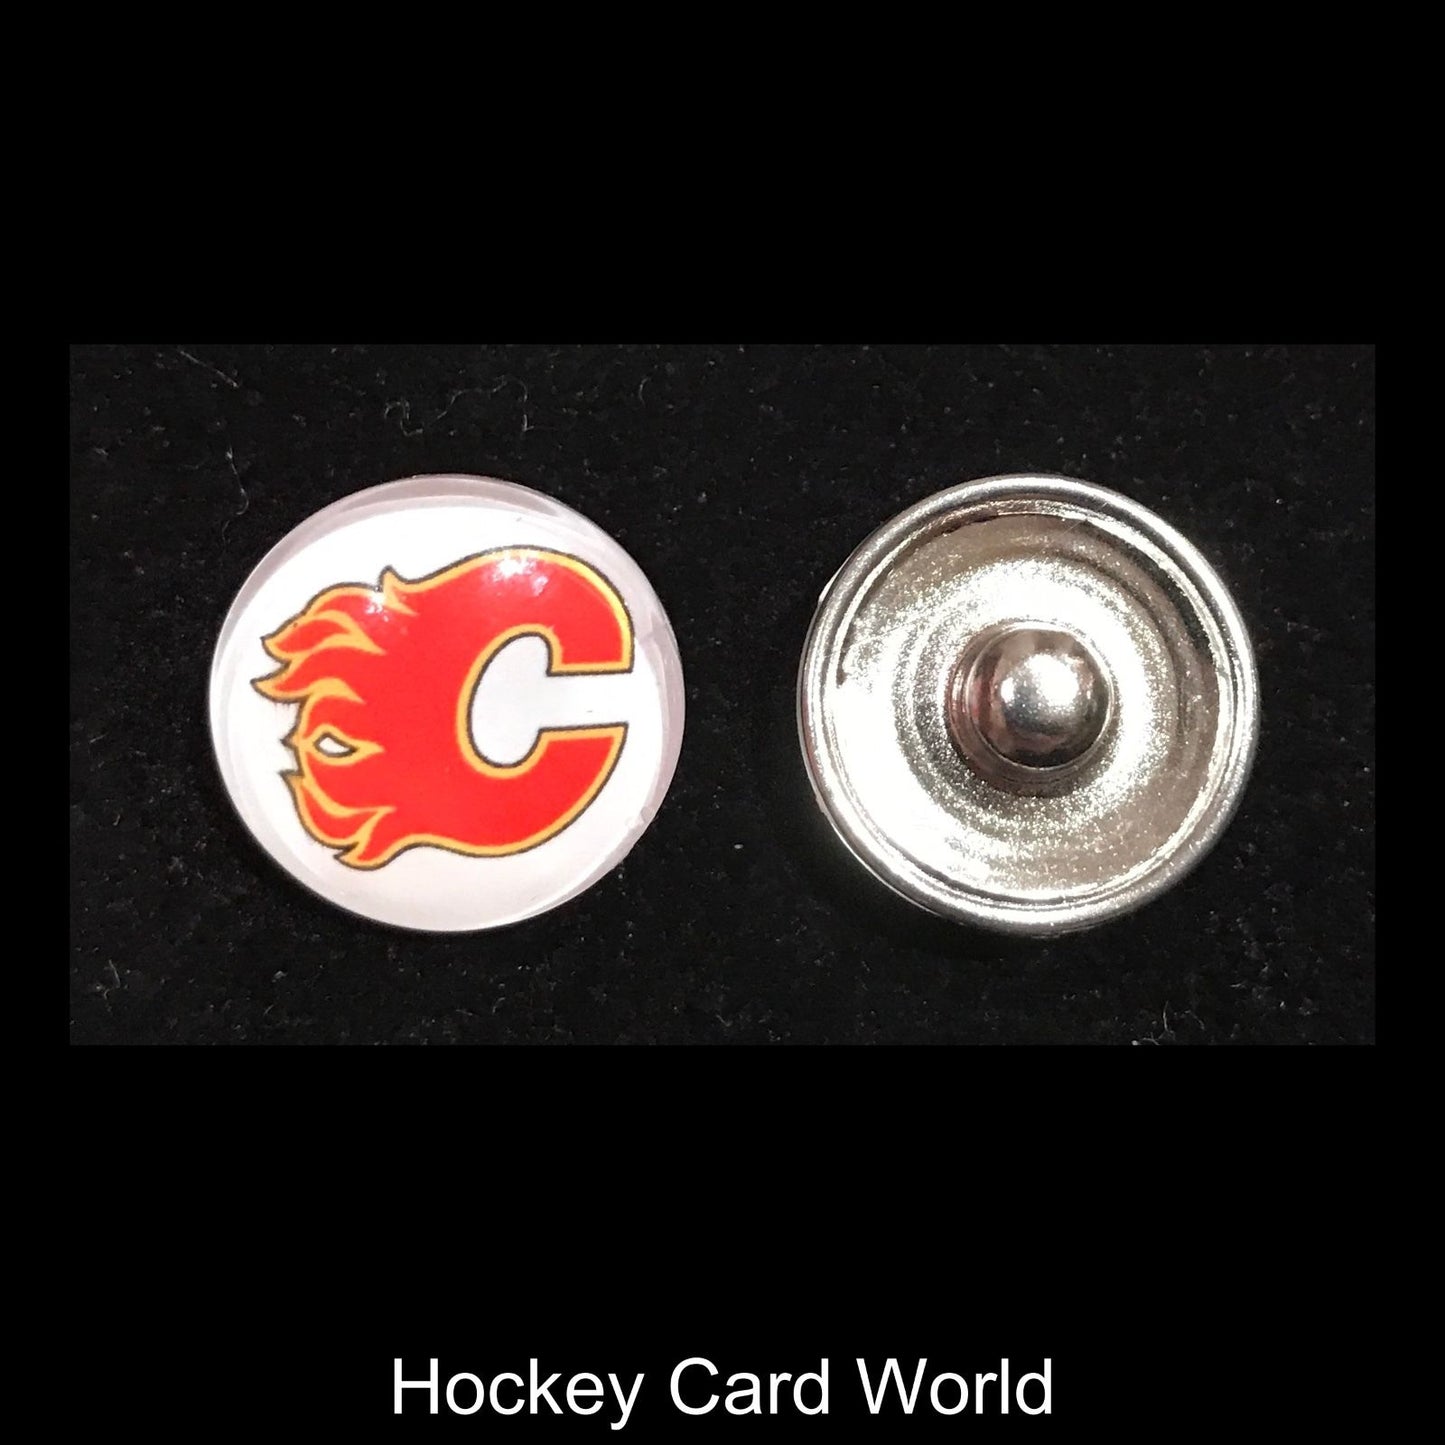  Calgary Flames NHL Snap Ginger Button Jewelry for Jackets, Bracelets Image 1